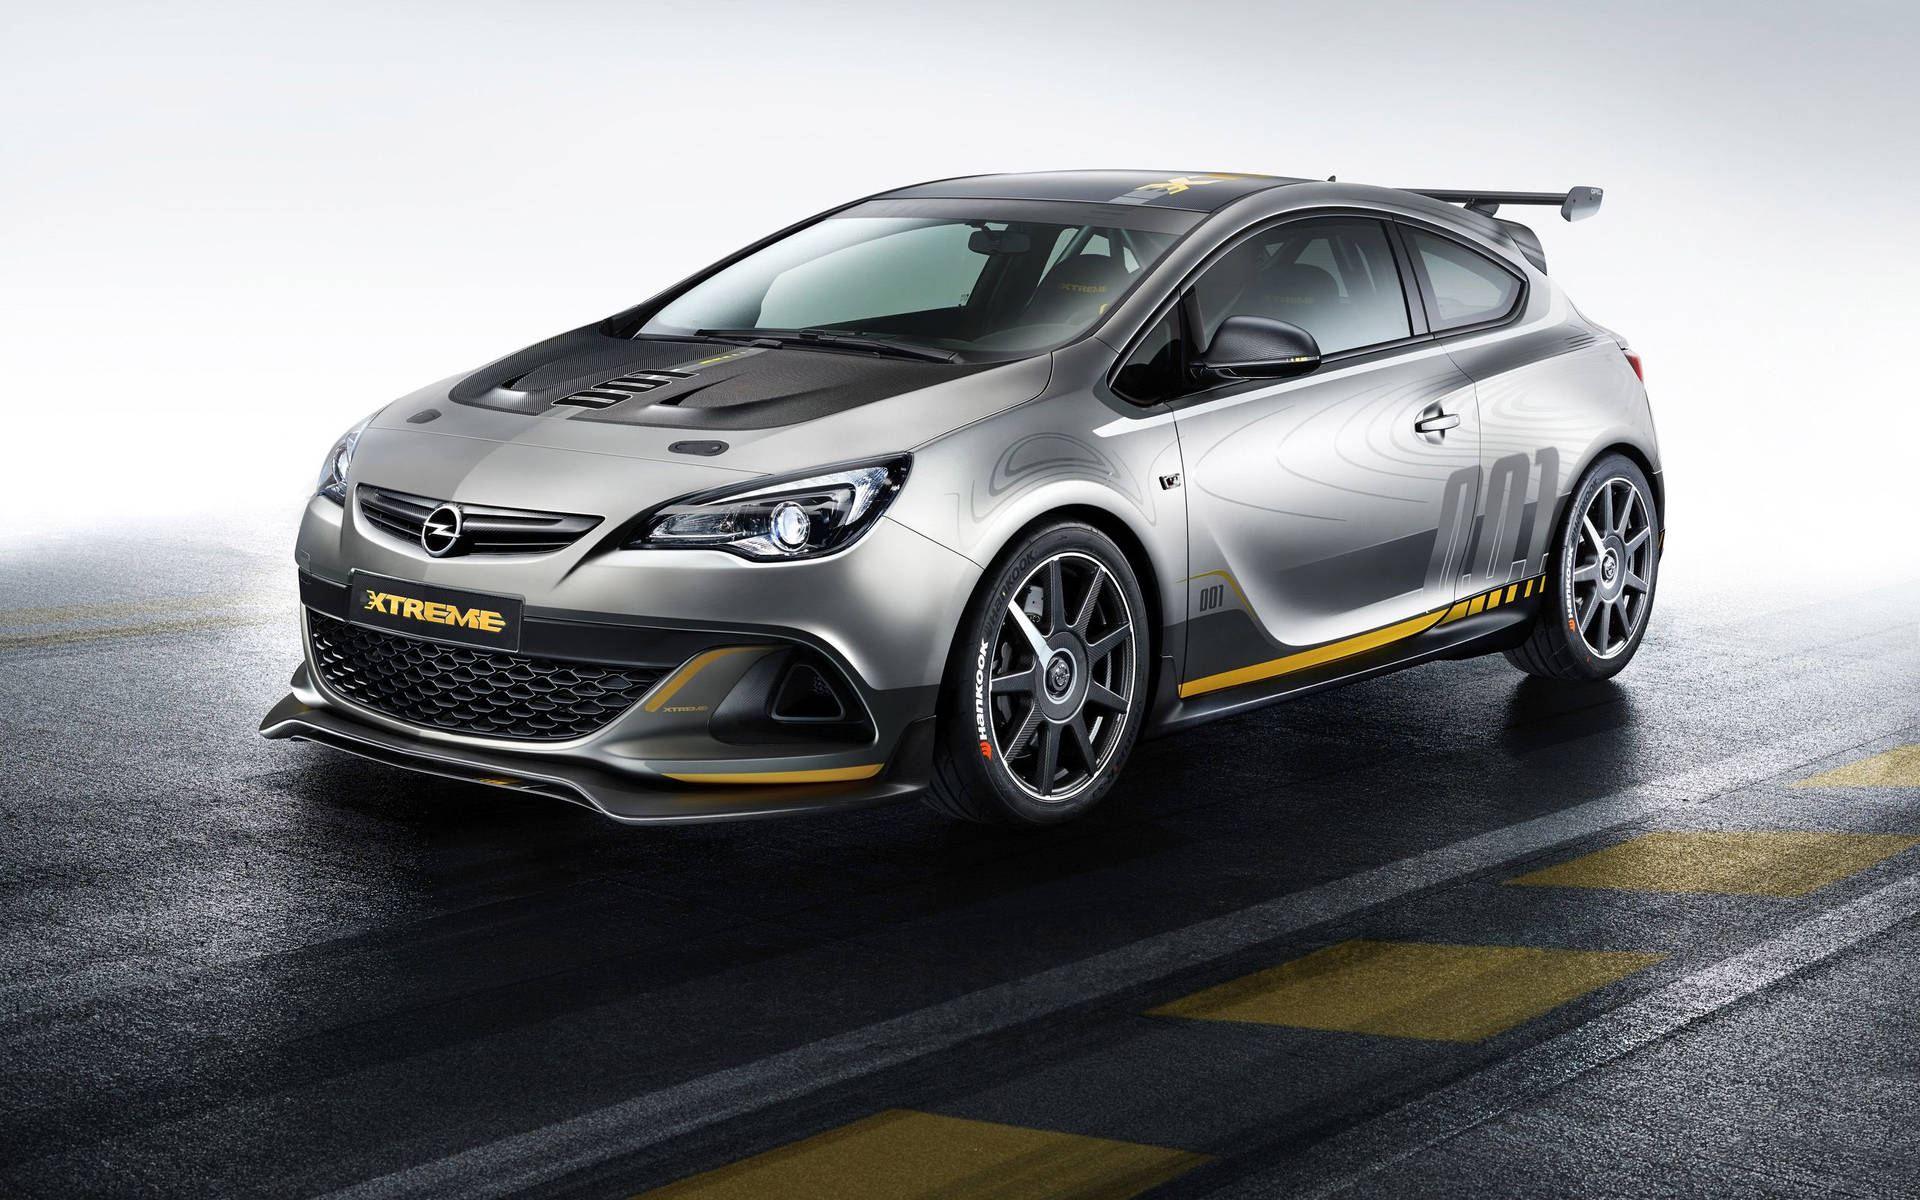 Gray Opel Astra Opc Extreme Background